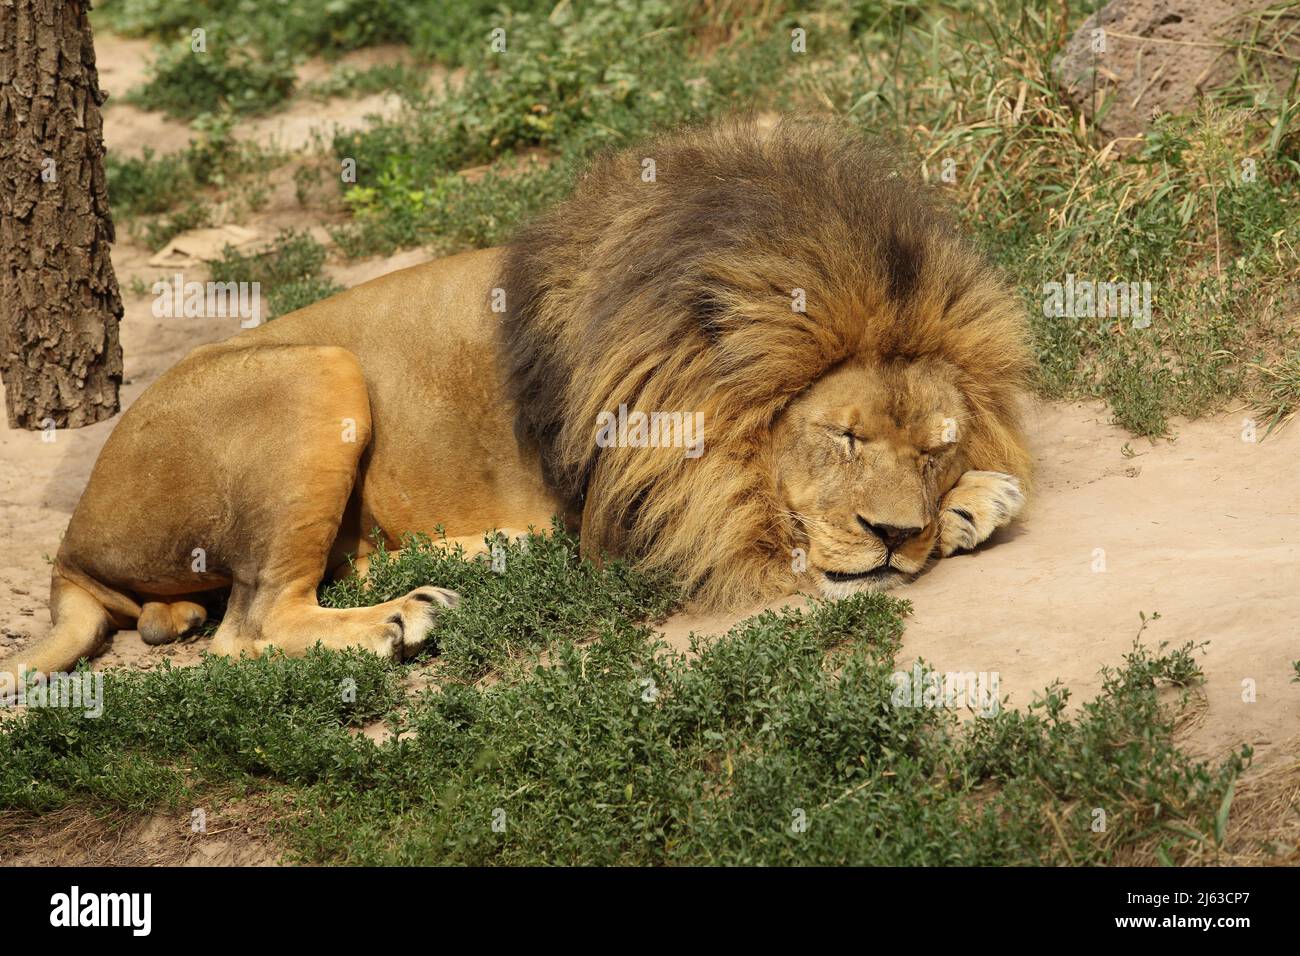 A closeup of a male lion sleeping.  This lion has scars and marks from fighting. Stock Photo